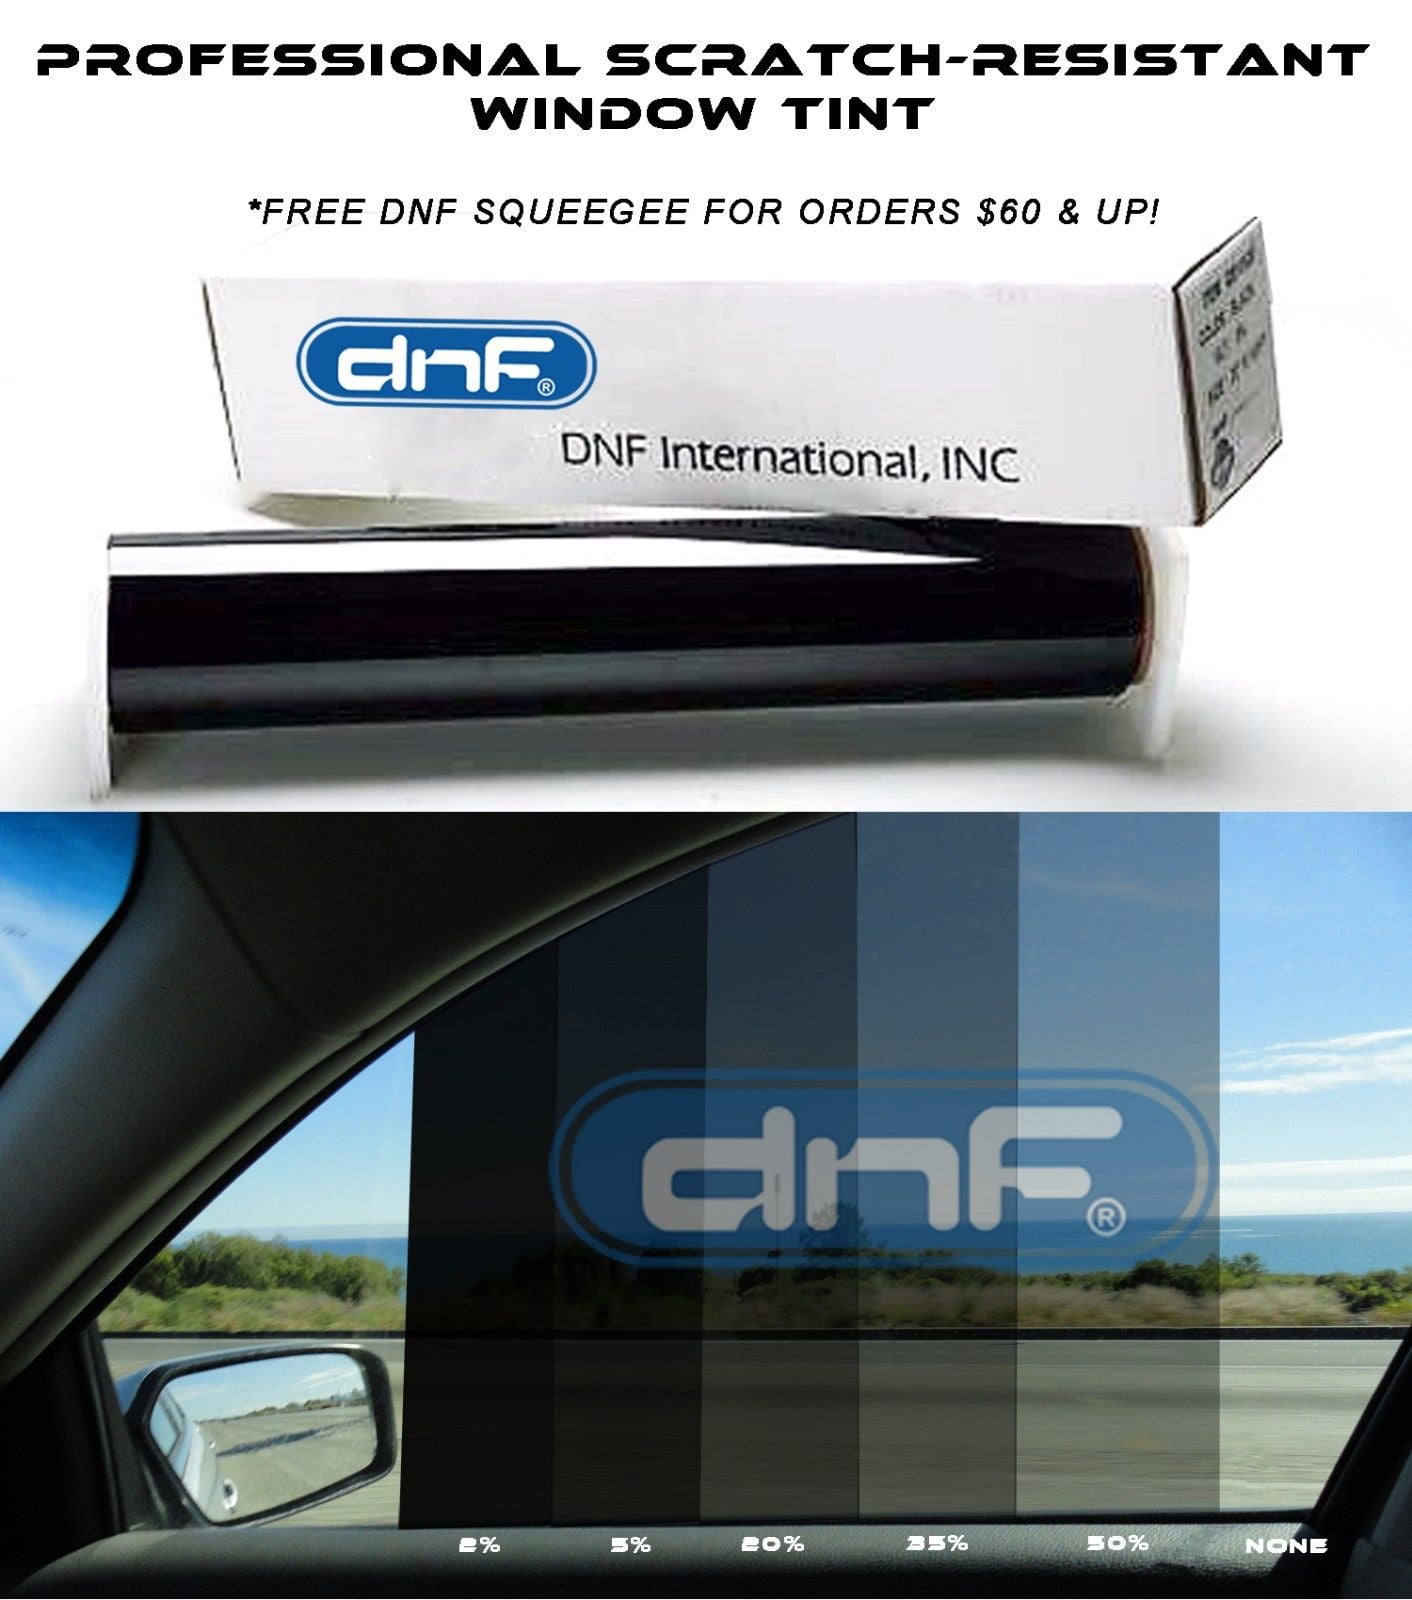 dnf 100ft 1ply window tint film 5 black shade 30 x 100 ft for car home commercial building walmart com walmart com dnf 100ft 1ply window tint film 5 black shade 30 x 100 ft for car home commercial building walmart com